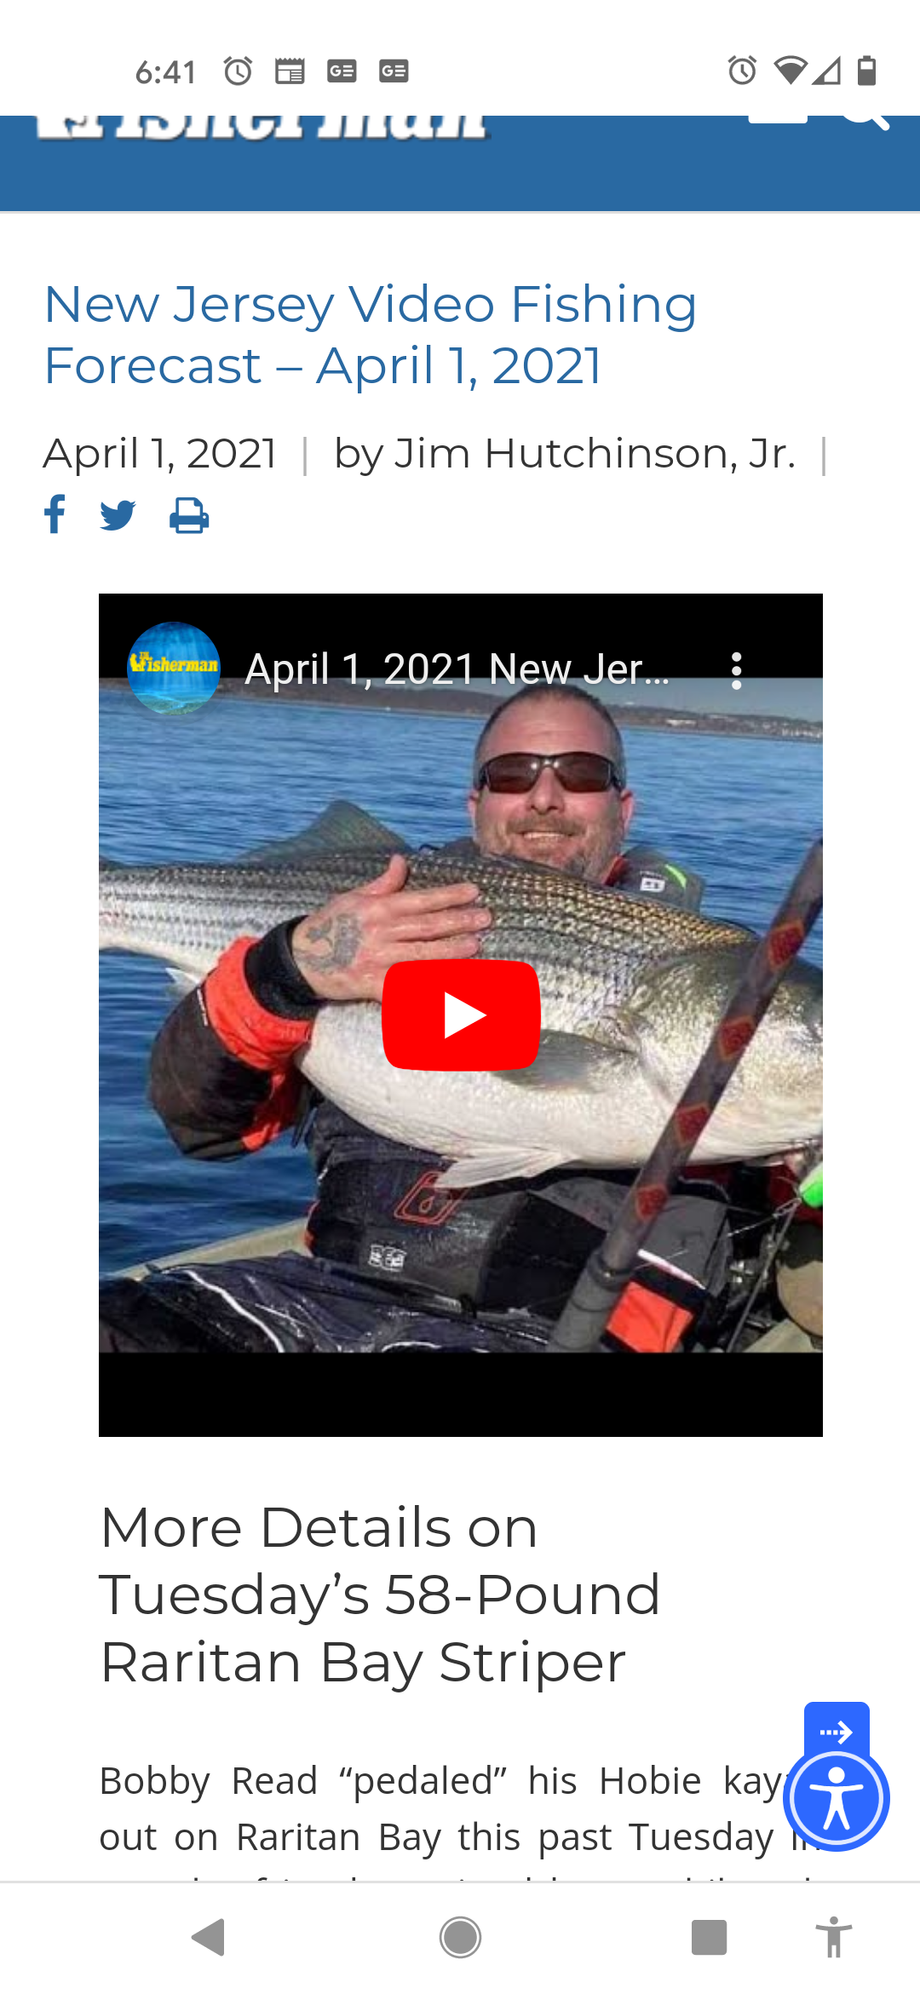 2021 Striper run reports - The Hull Truth - Boating and Fishing Forum